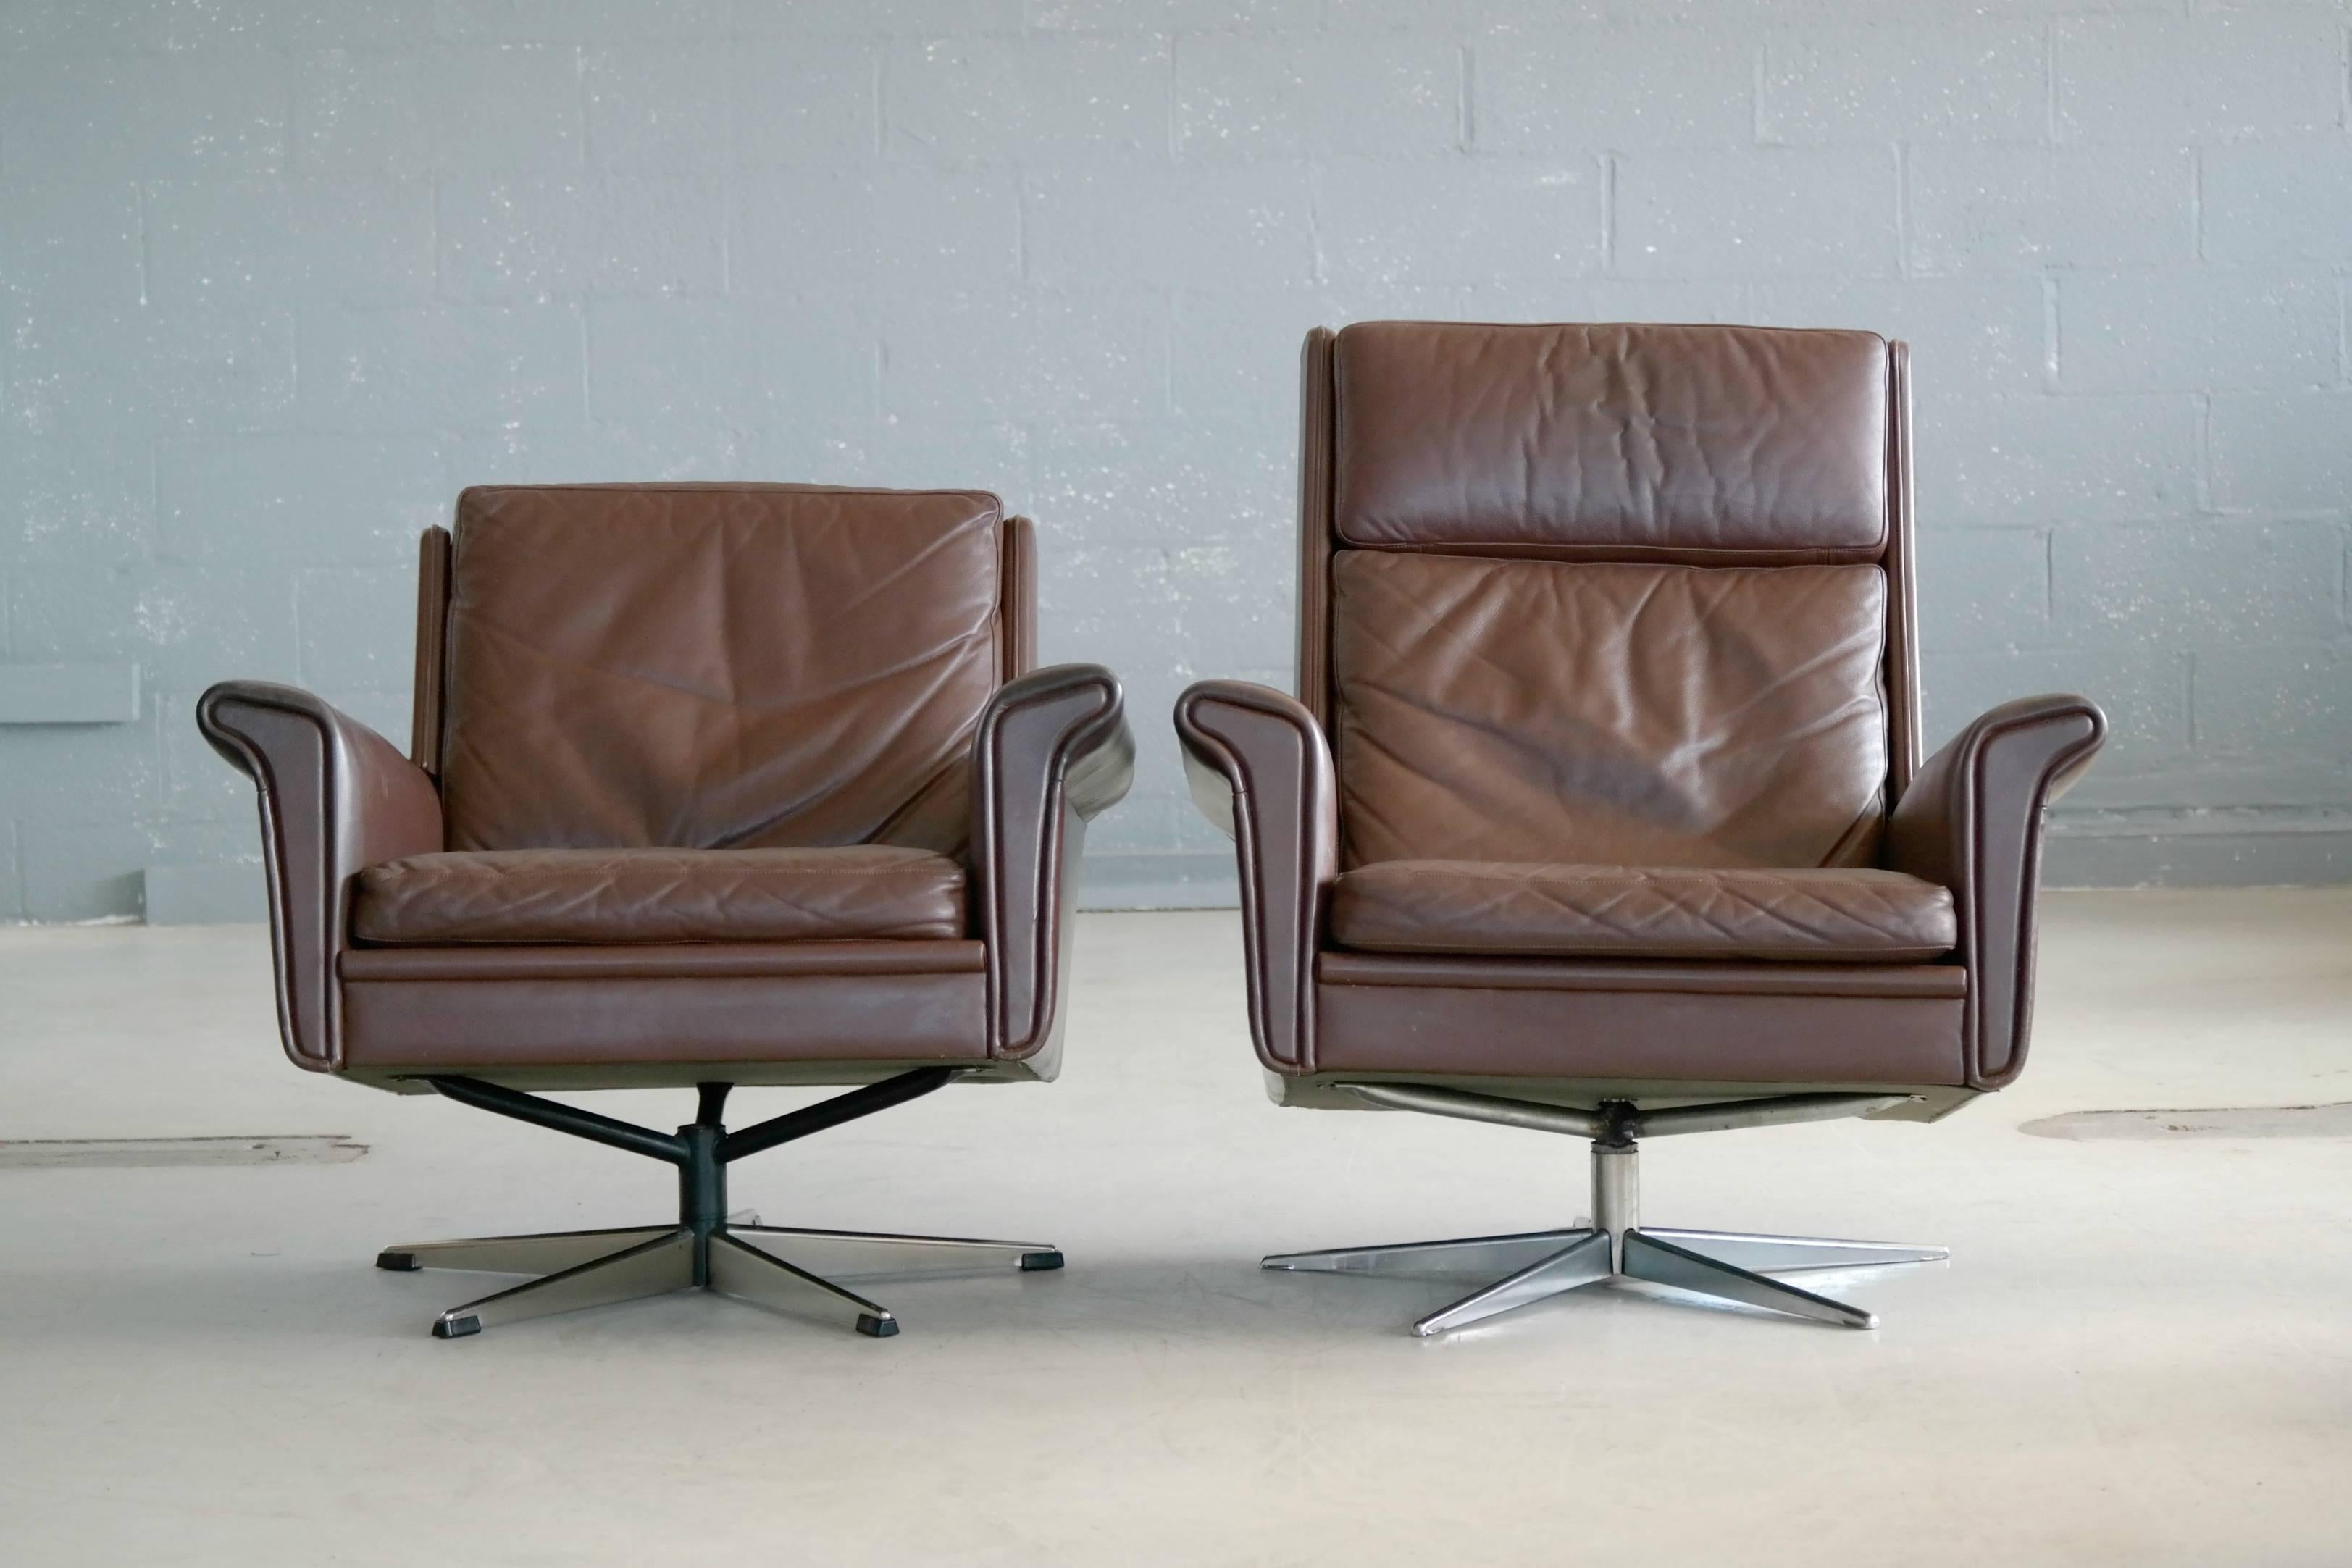 Modern and luxurious swivel chairs in supple brown chocolate colored leather on a chrome-plated aluminium swivel base. Beautiful example of Danish Modern at its best designed by Georg Thams, circa 1969 and produced sometimes in the early 1970s. The